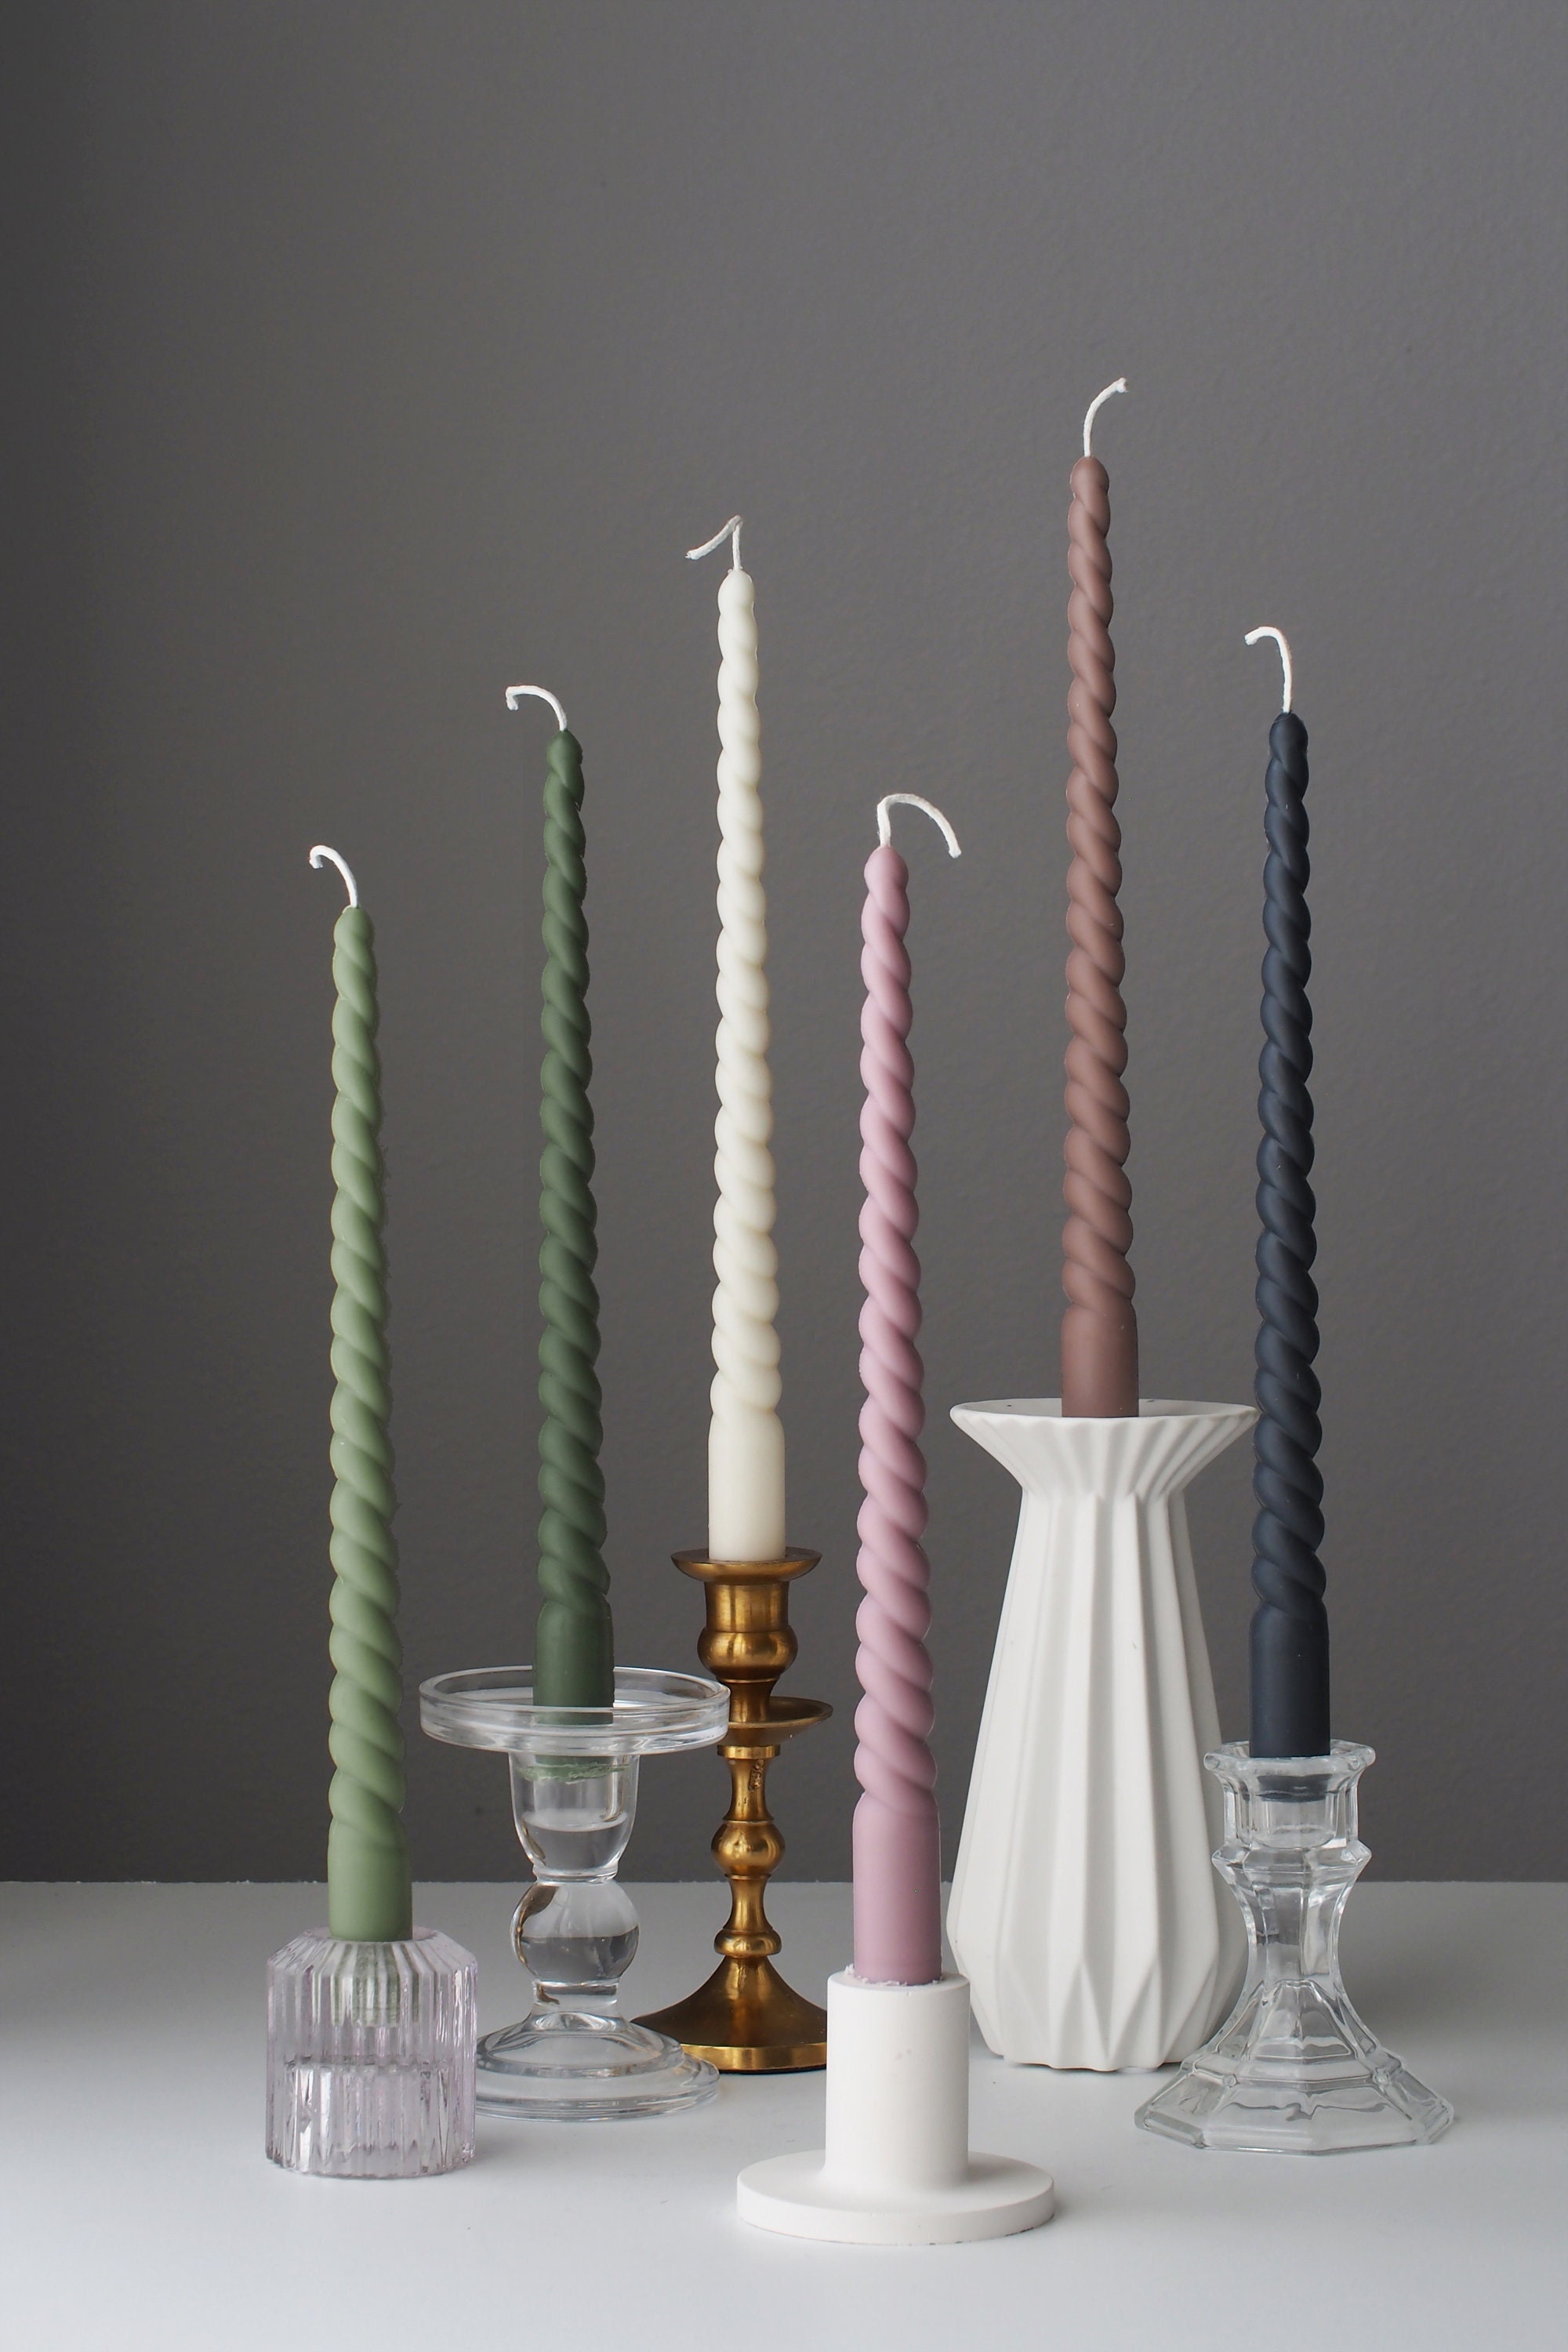 Twisted Candle Spiral Candle Taper Candles Romantic Candle Natural Beeswax  White and Purple Candles 